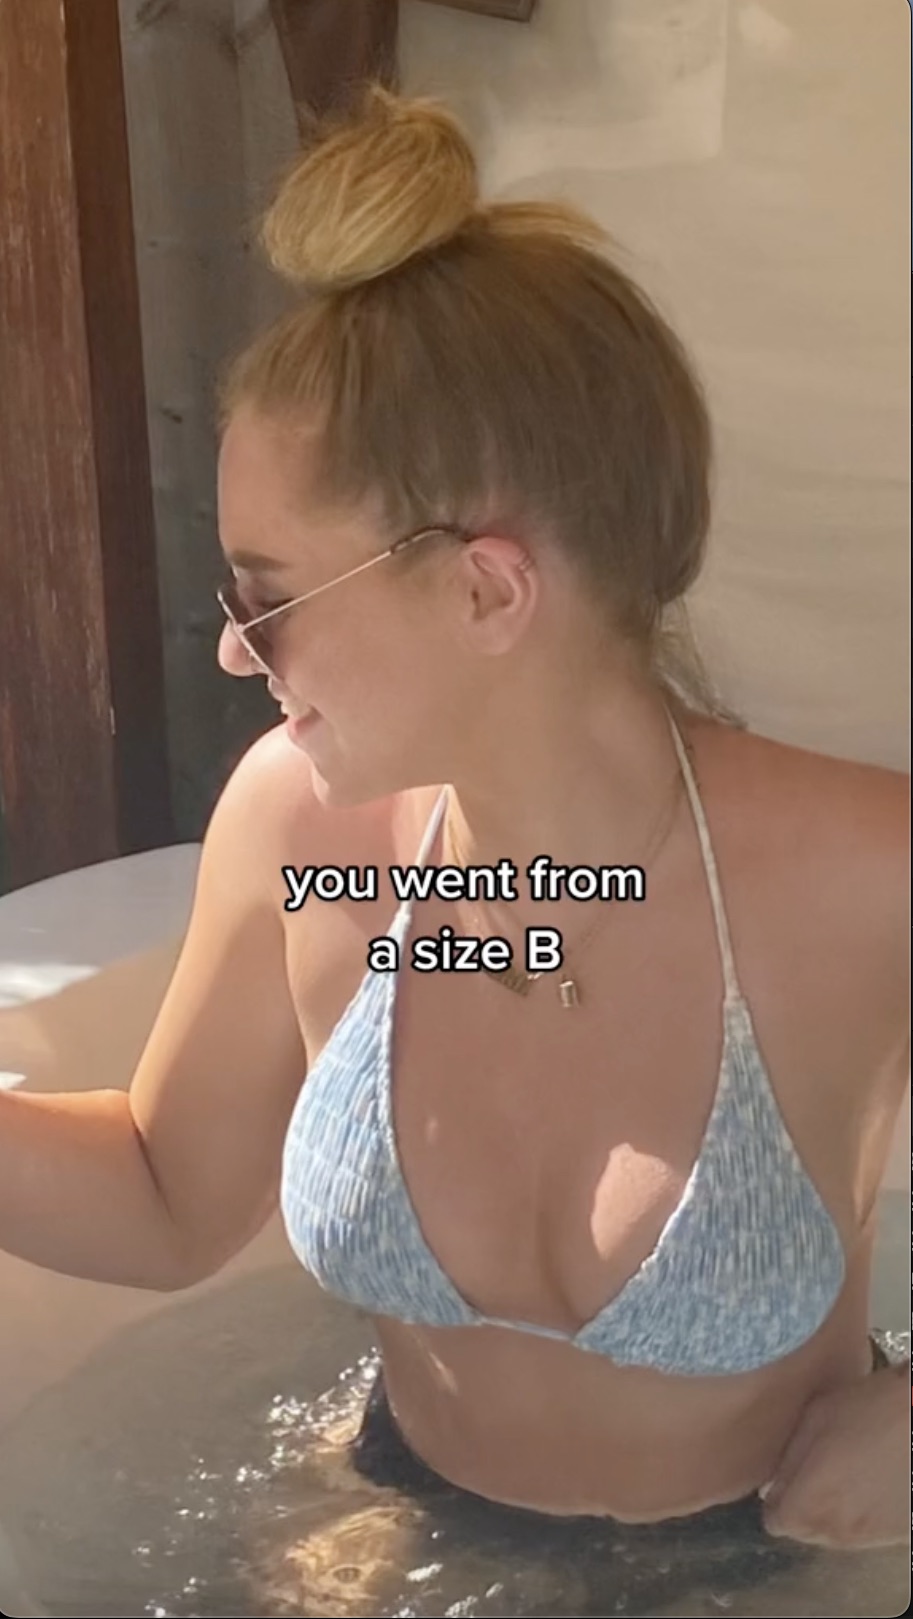 andrew eckroth recommends Perfect B Cup Boobs